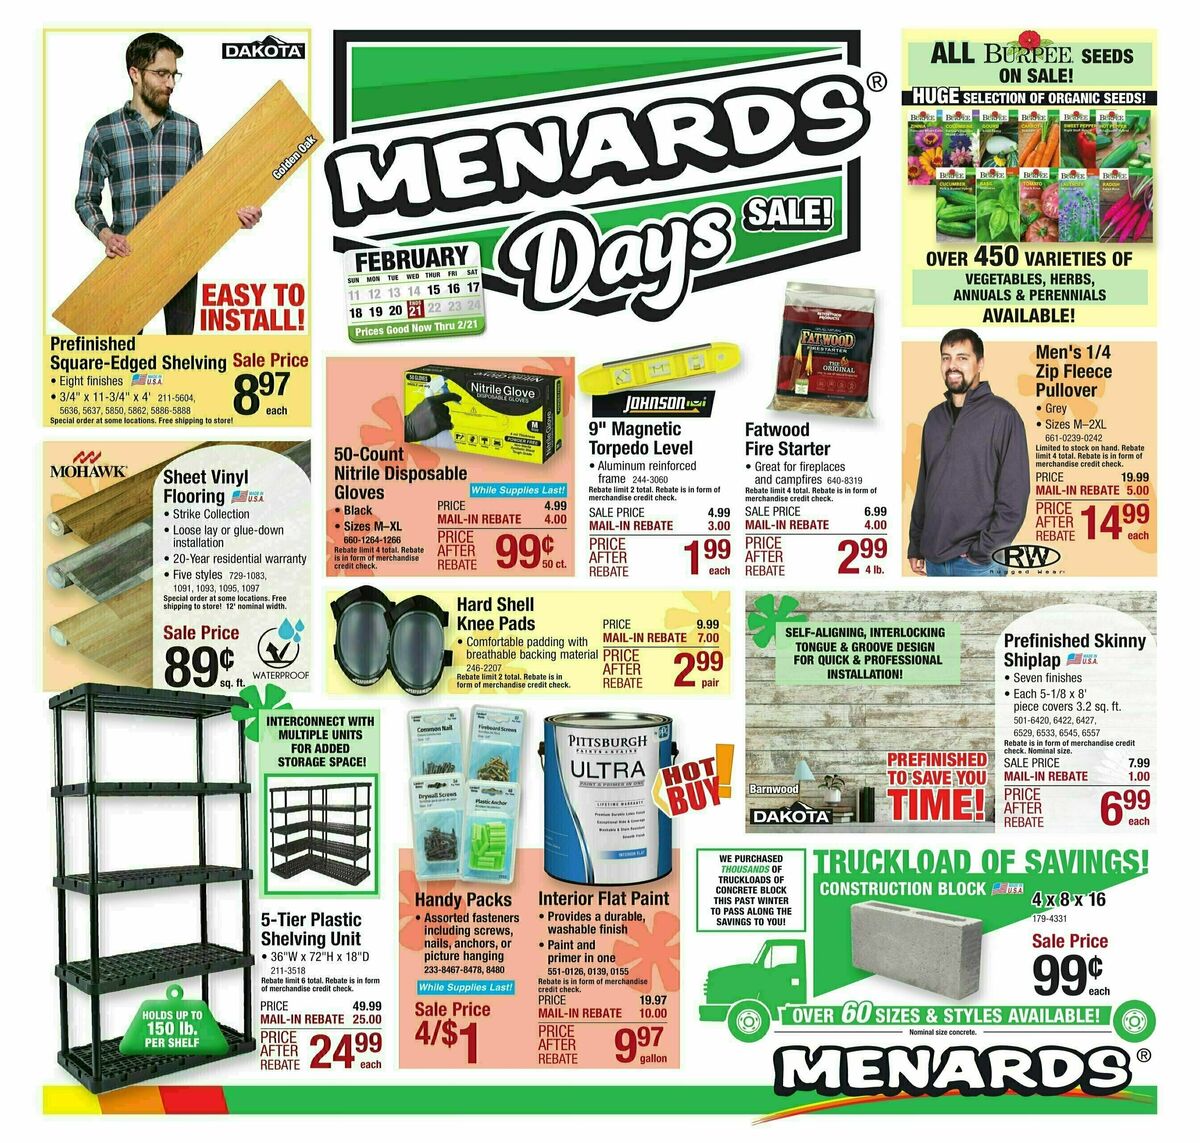 Menards Menard Days Sale Weekly Ad from February 14